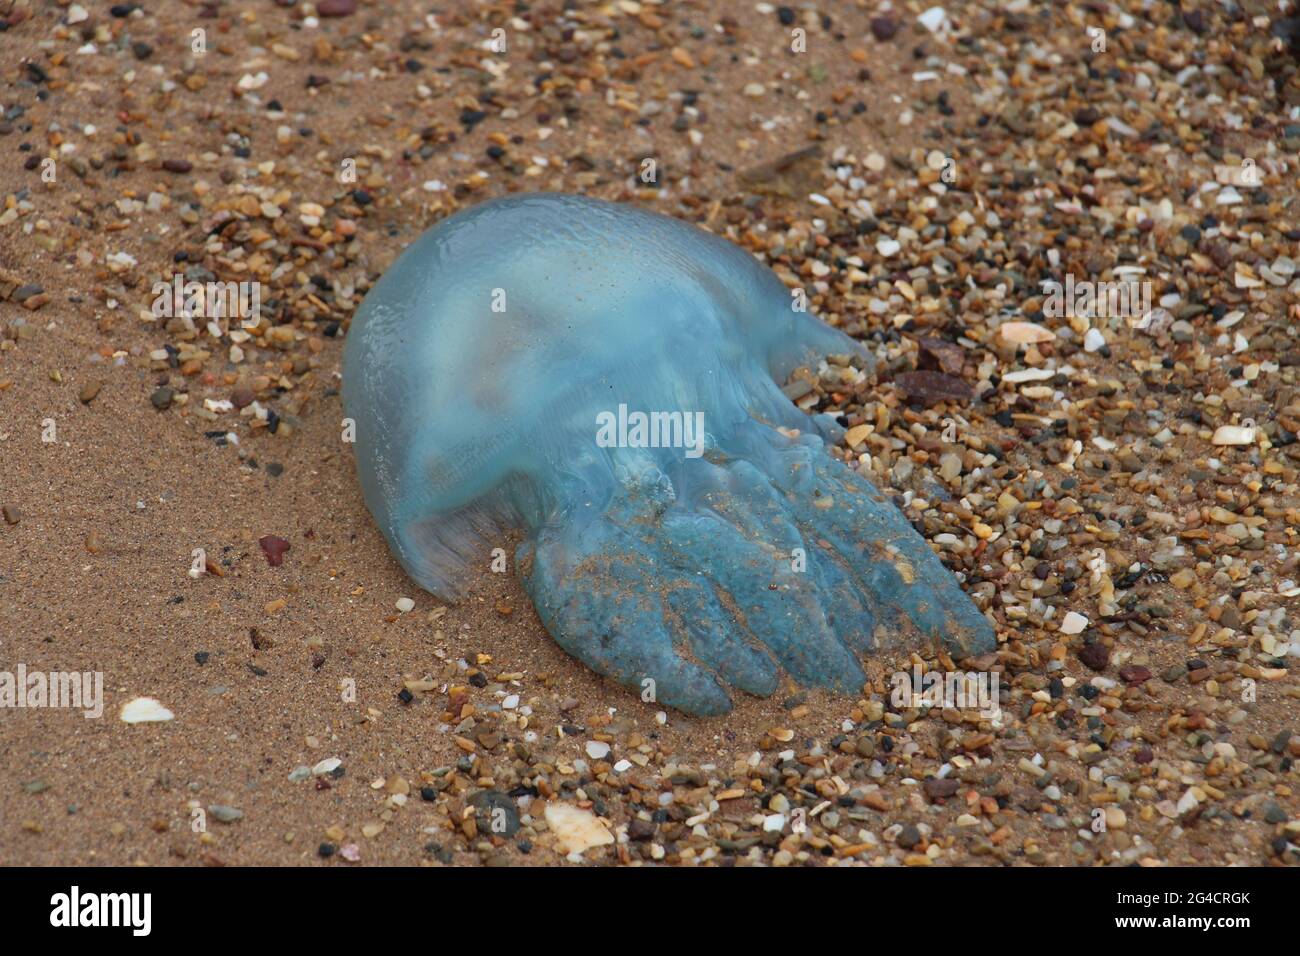 A Jelly Blubber blue jellyfish on sand and shells on a beach on the east coast of Australia Stock Photo